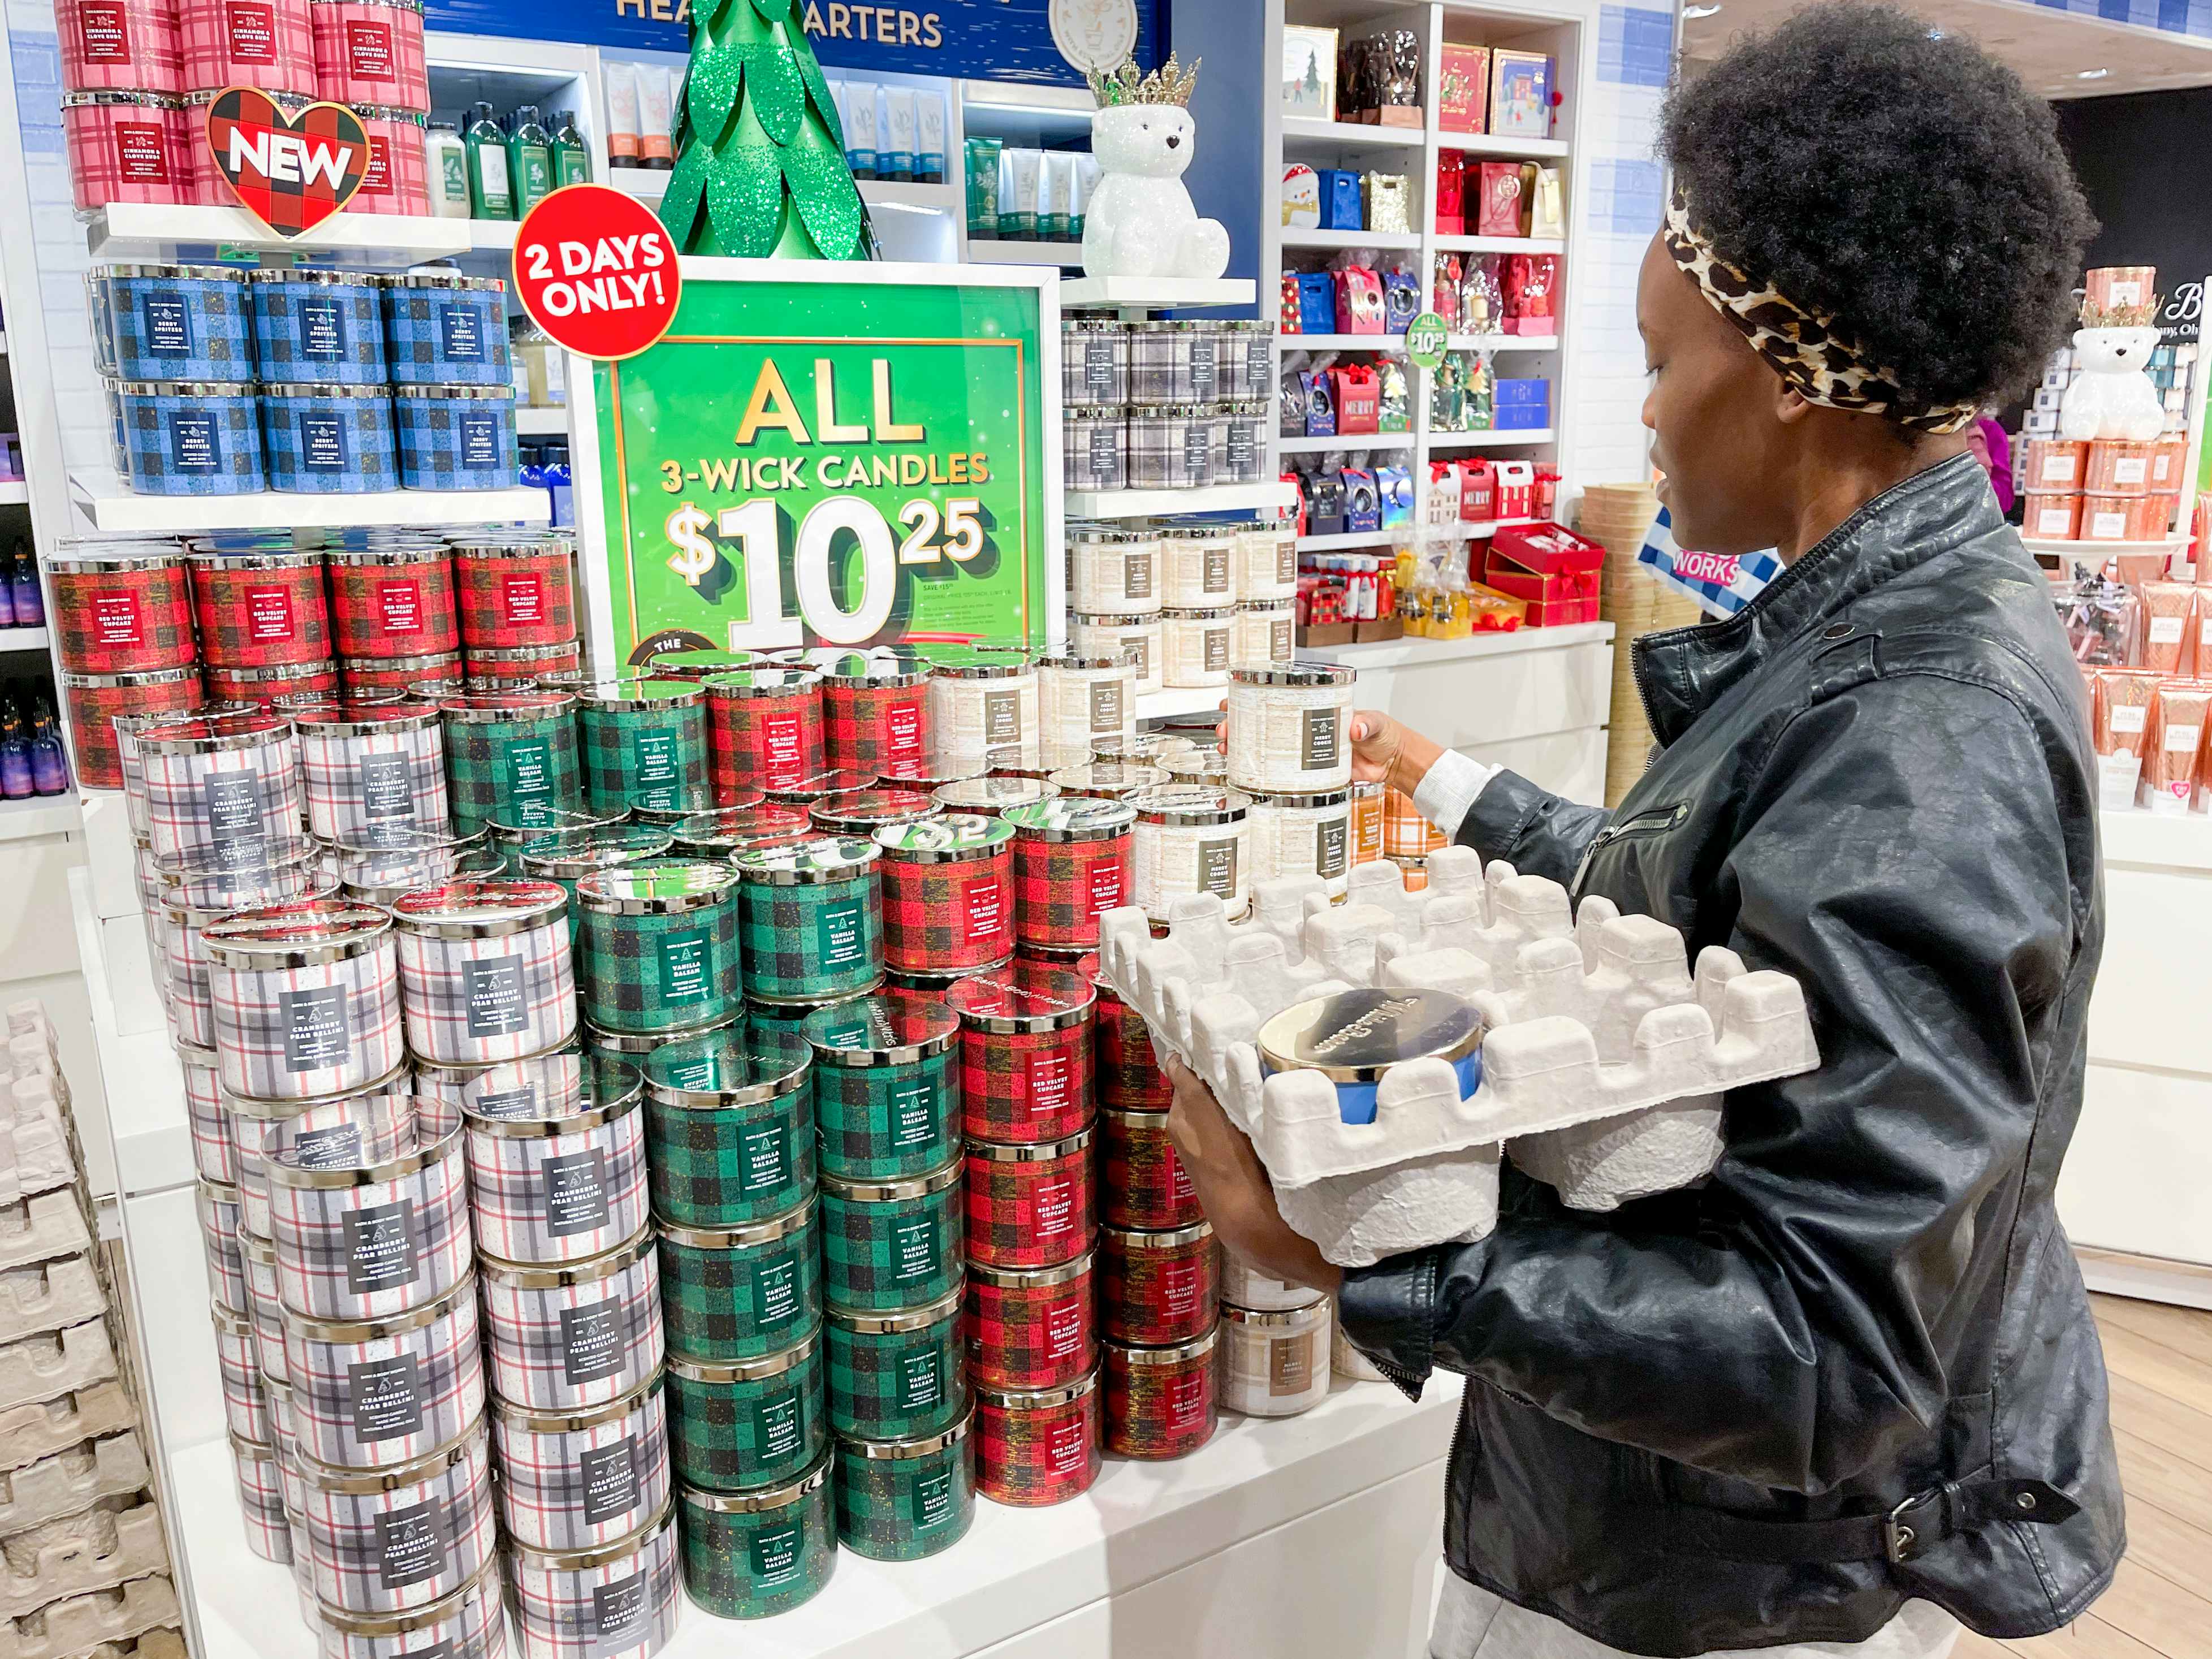 A woman looking at candles at Bath and Body works during the Candle Day sale.